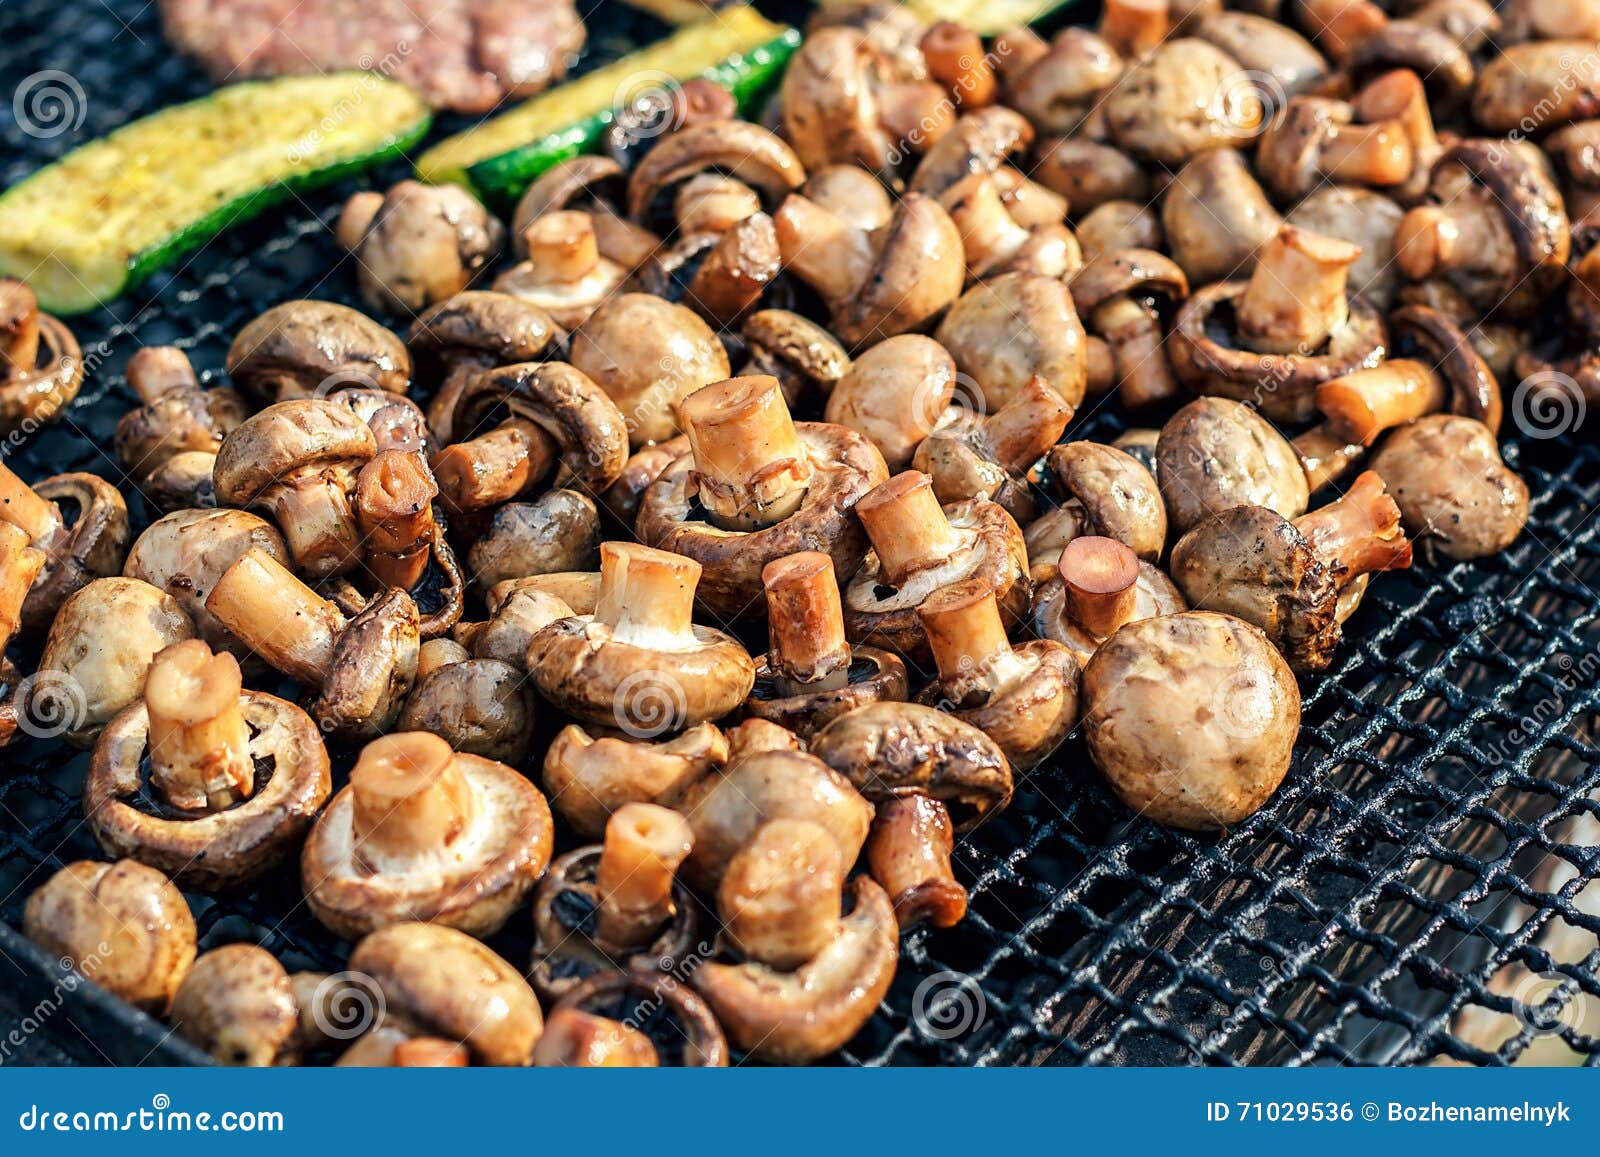 White Mushrooms Grilled on or BBQ and Small Drops of Water. Cooking Mushrooms on the Grill Stock Photo - Image of cuisine, 71029536